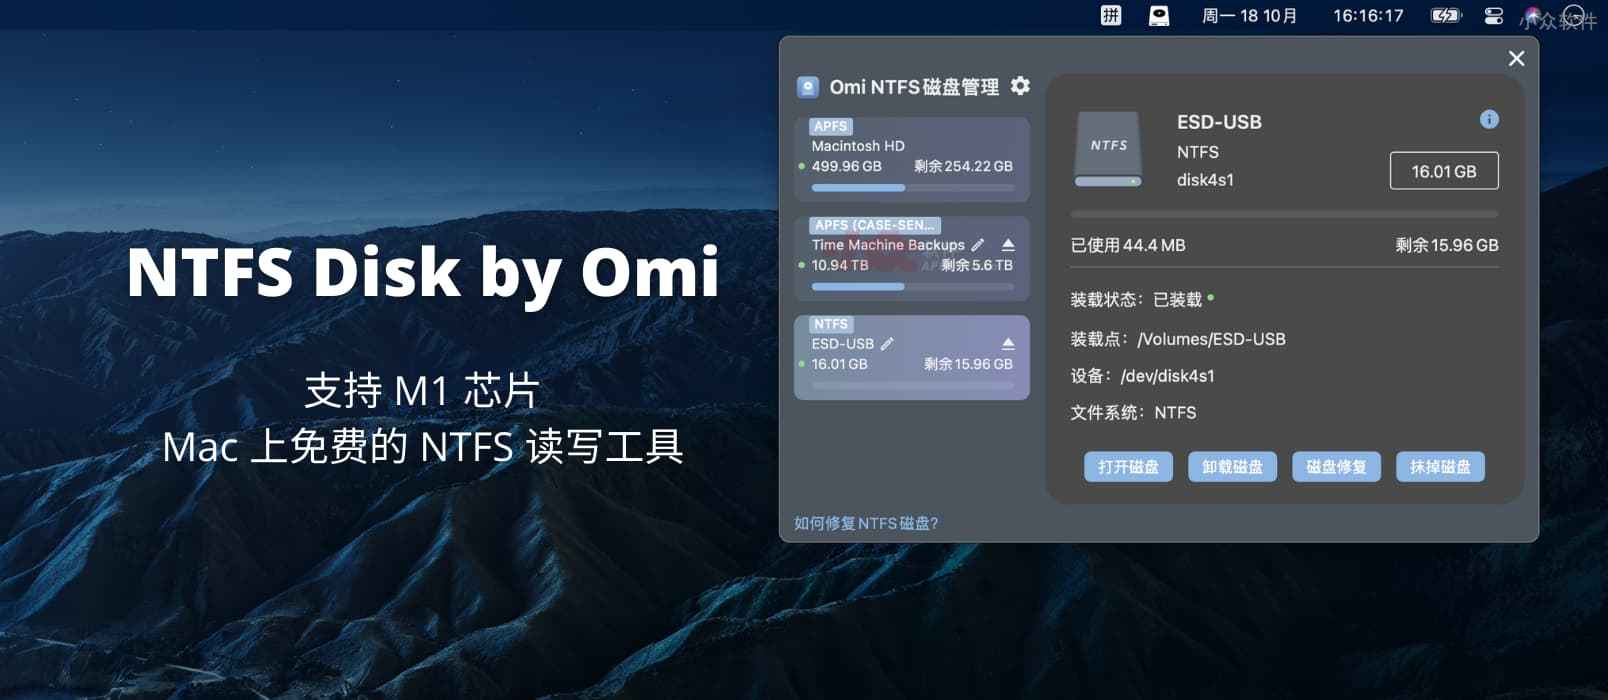 NTFS Disk by Omi - 支持 M1 芯片，Mac 上免费的 NTFS 读写工具